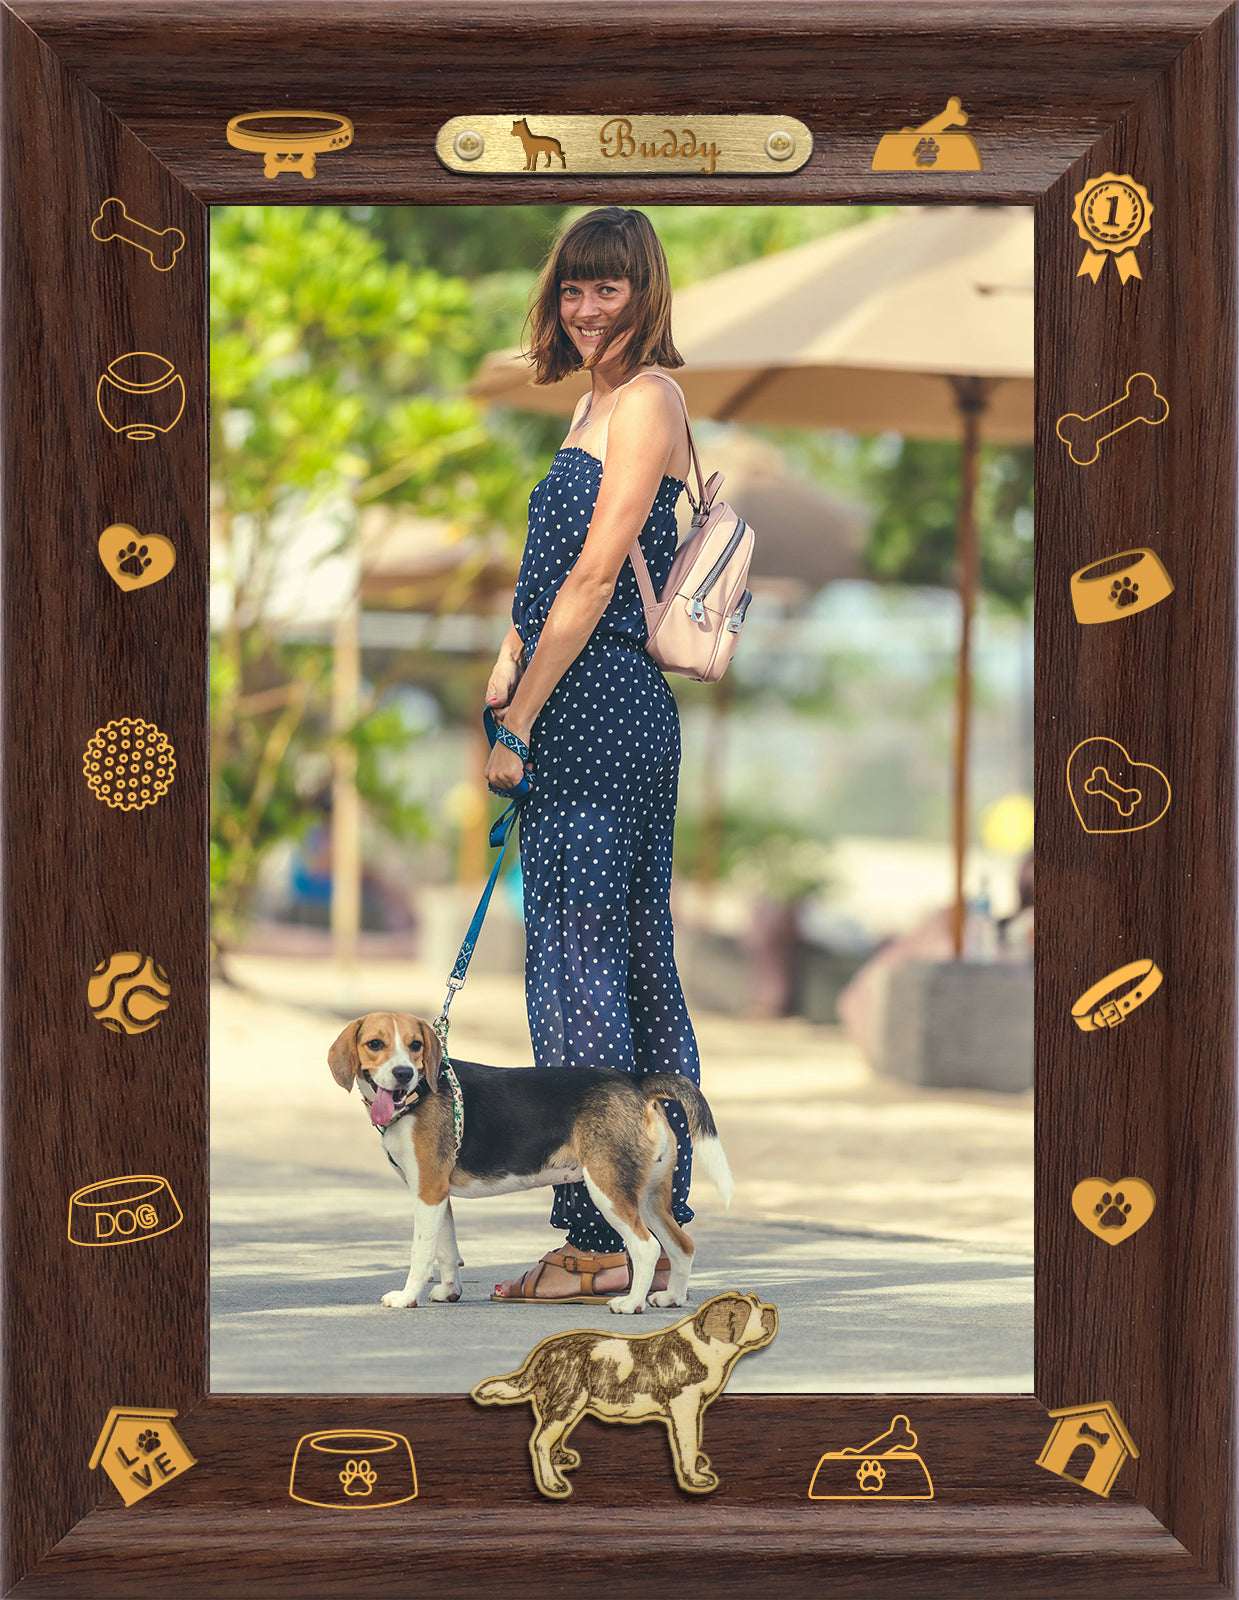 Dotride Custom Picture Frame, Wood Photo Frame with Custom Wooden Carving, Can be engraved with any text you want, suitable for Suitable for Various Themes, Golden Retriever